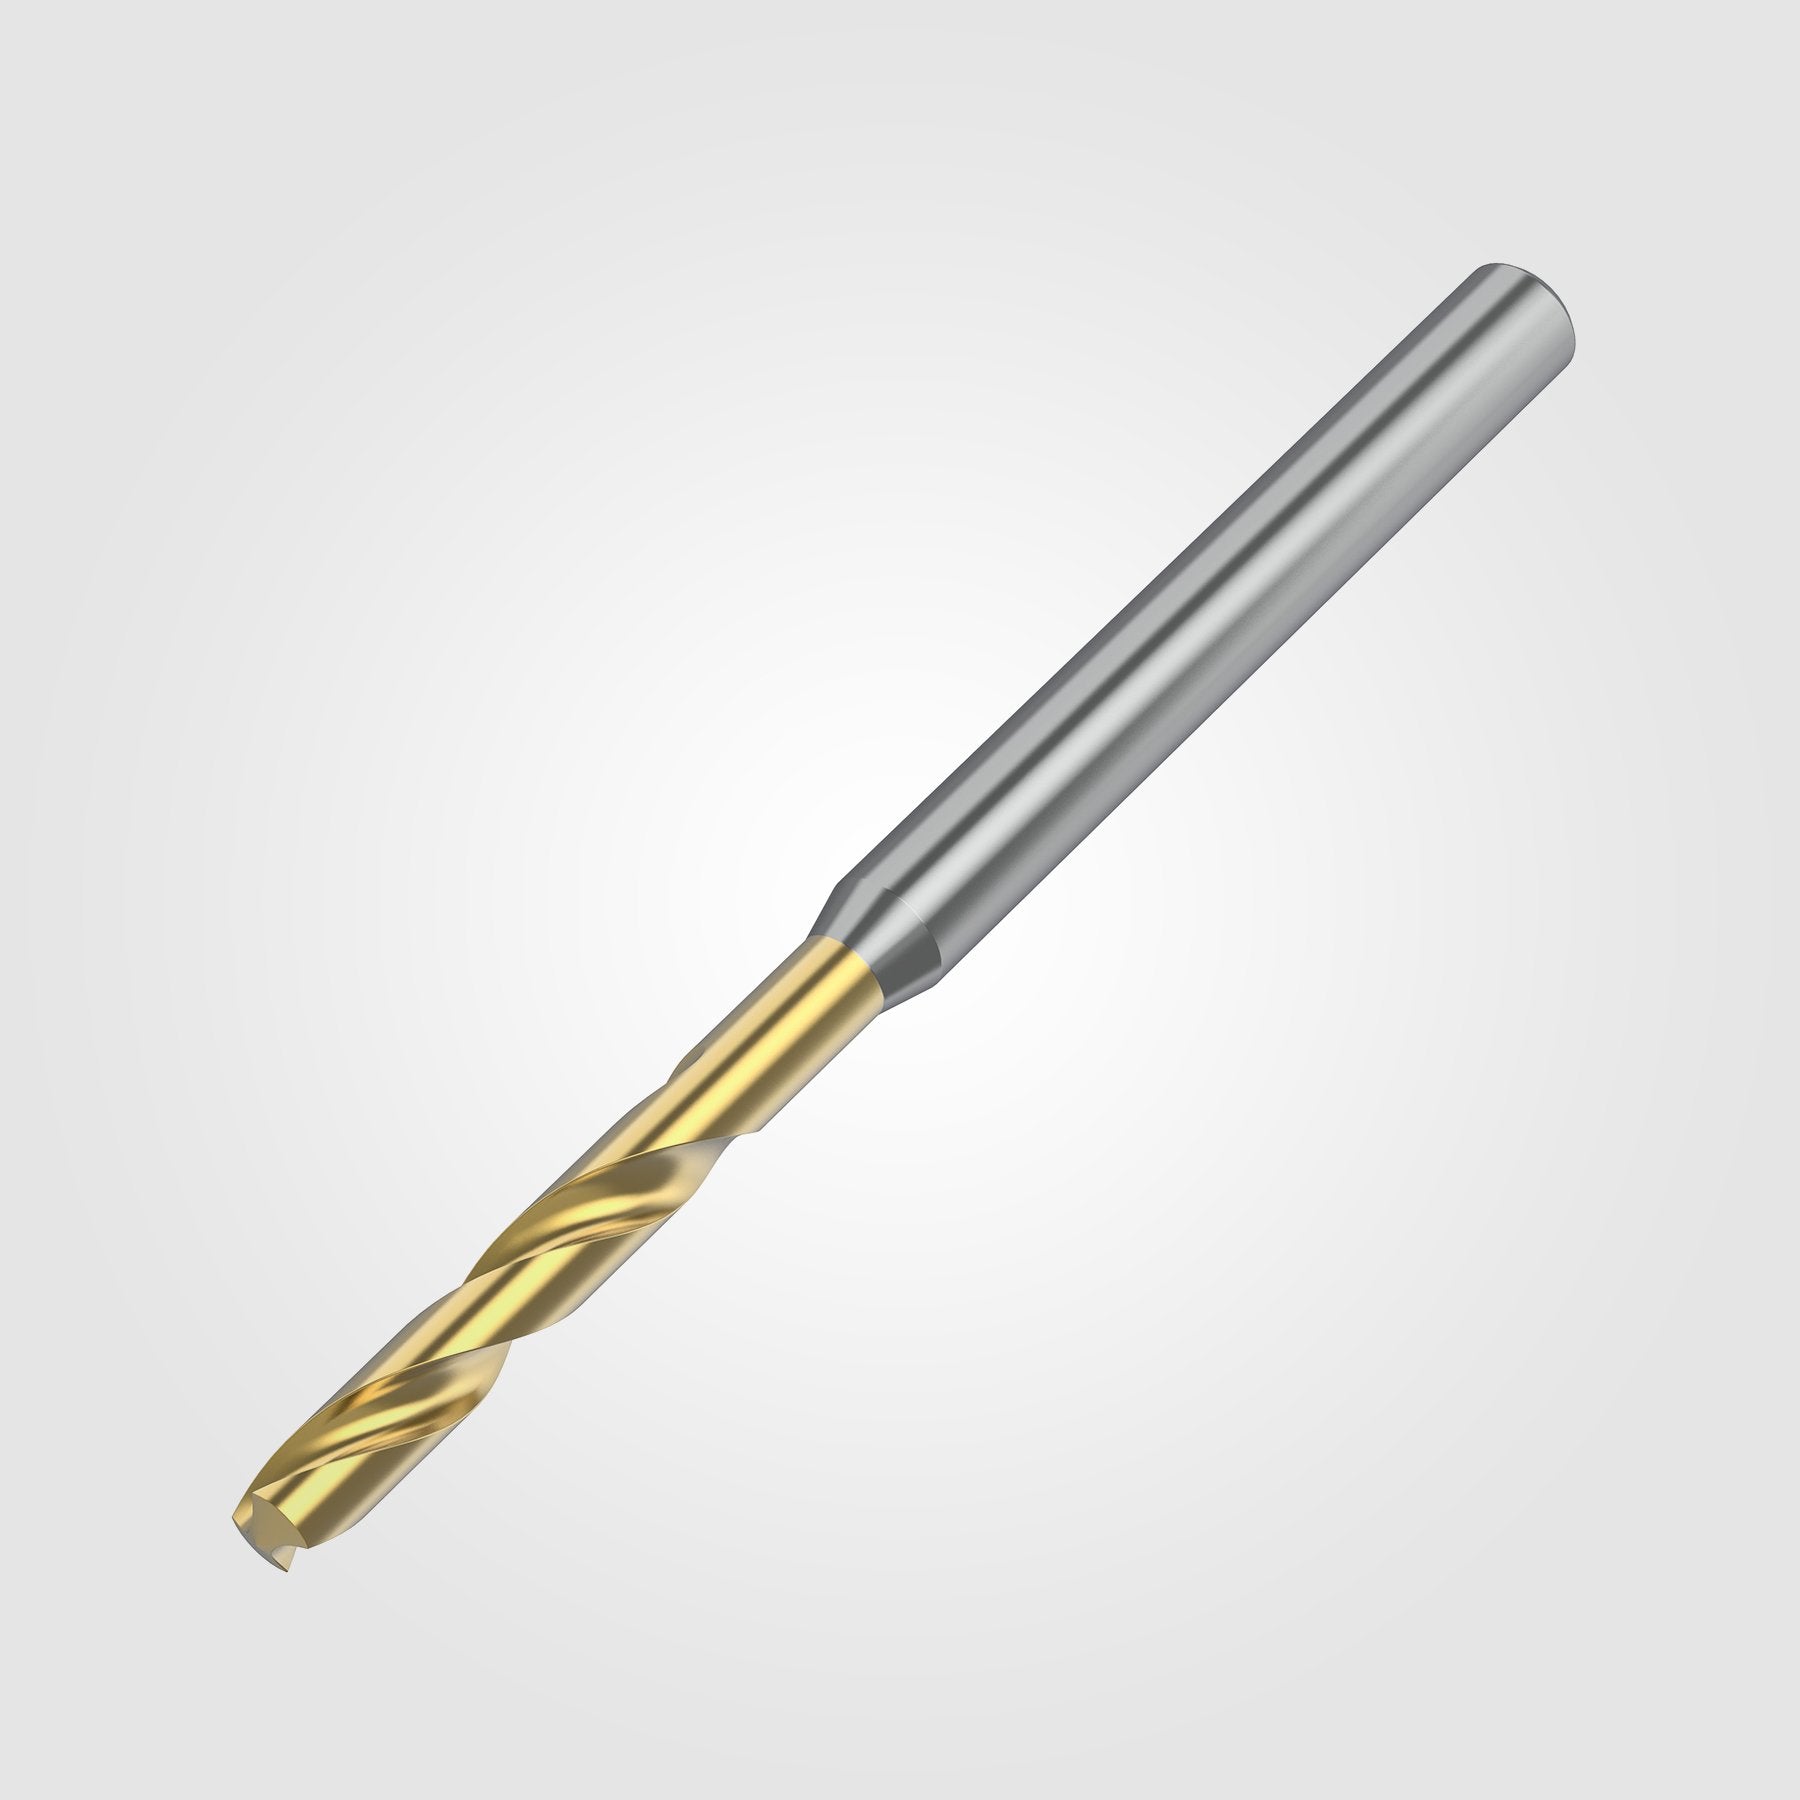 GOdrill (THROUGH COOLANT) | 17.463mm / .6875" / 3xD | SOLID CARBIDE DRILL | 4151293